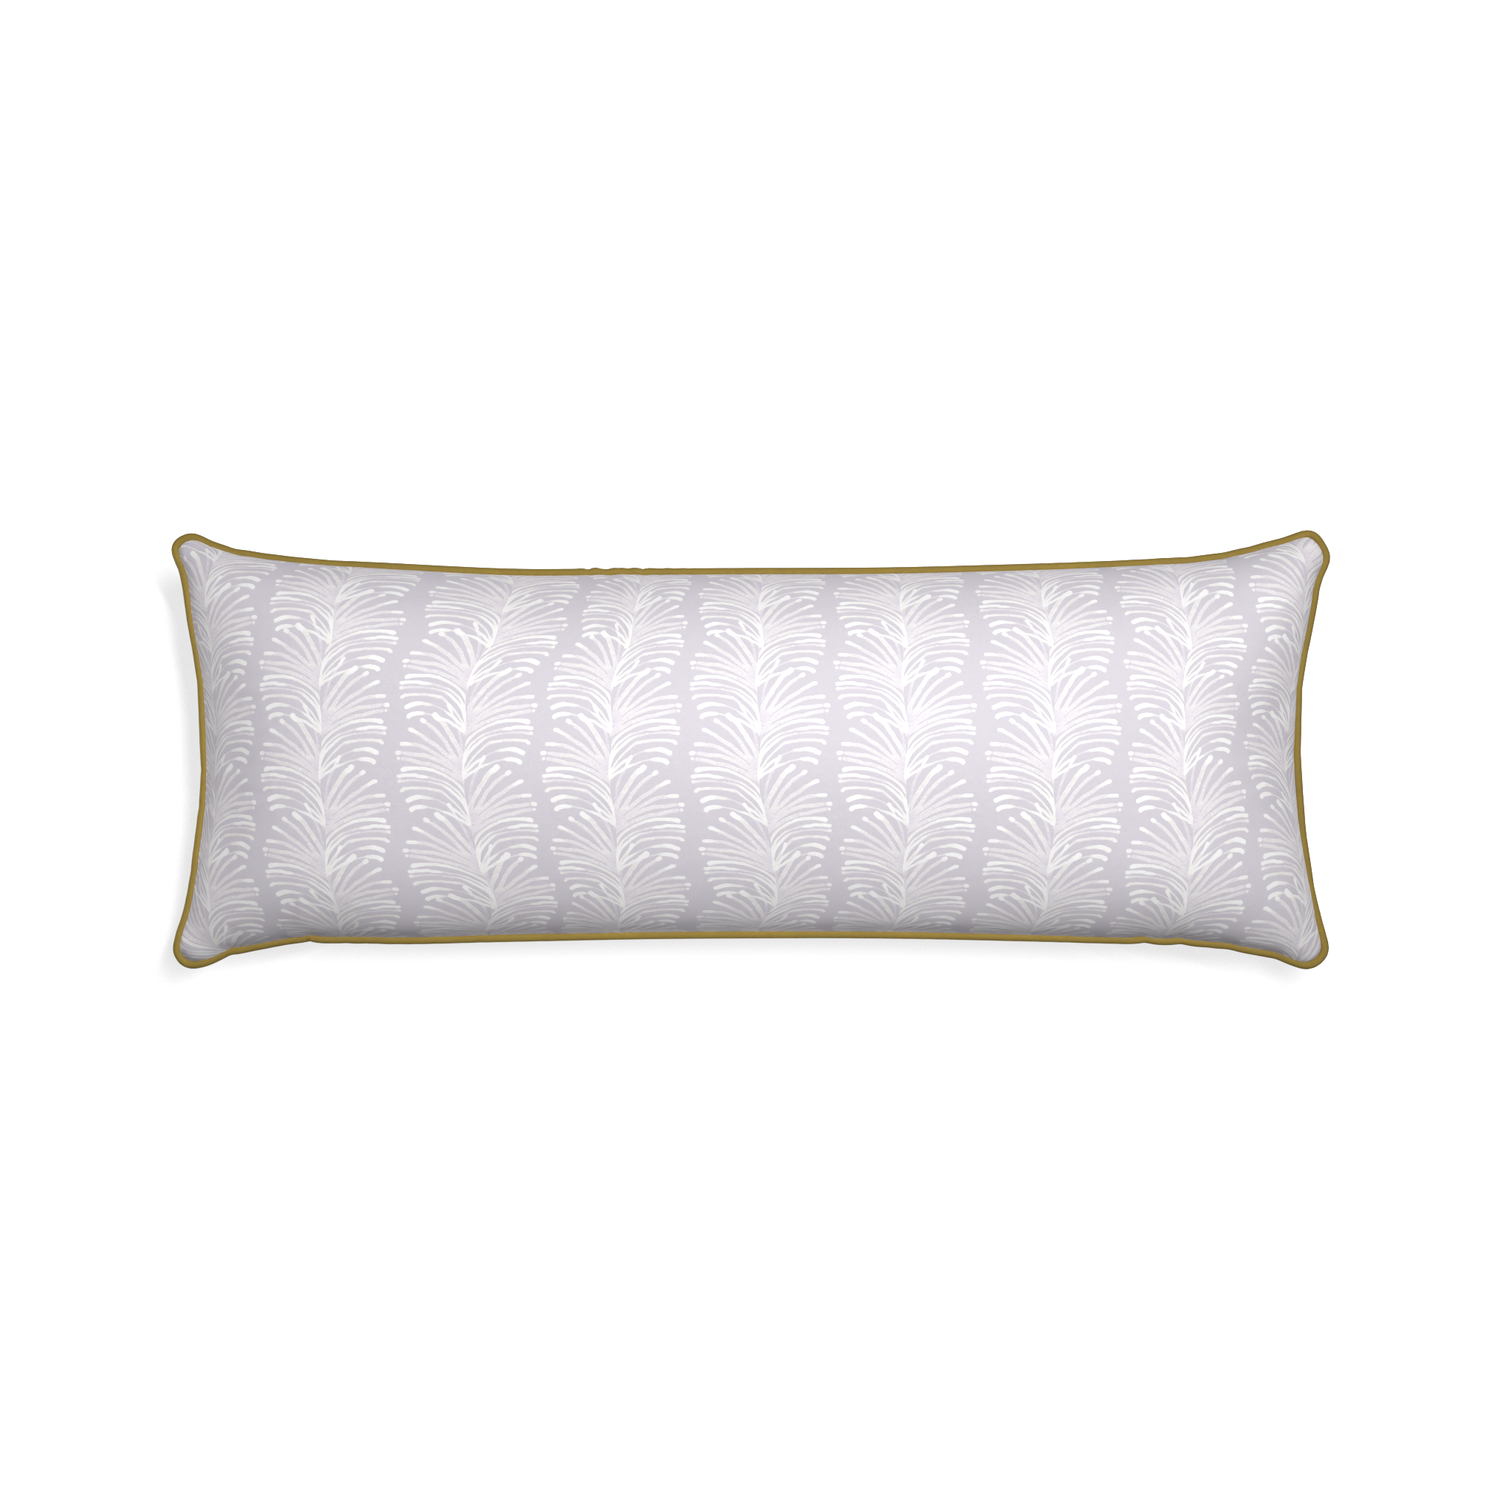 Xl-lumbar emma lavender custom lavender botanical stripepillow with c piping on white background